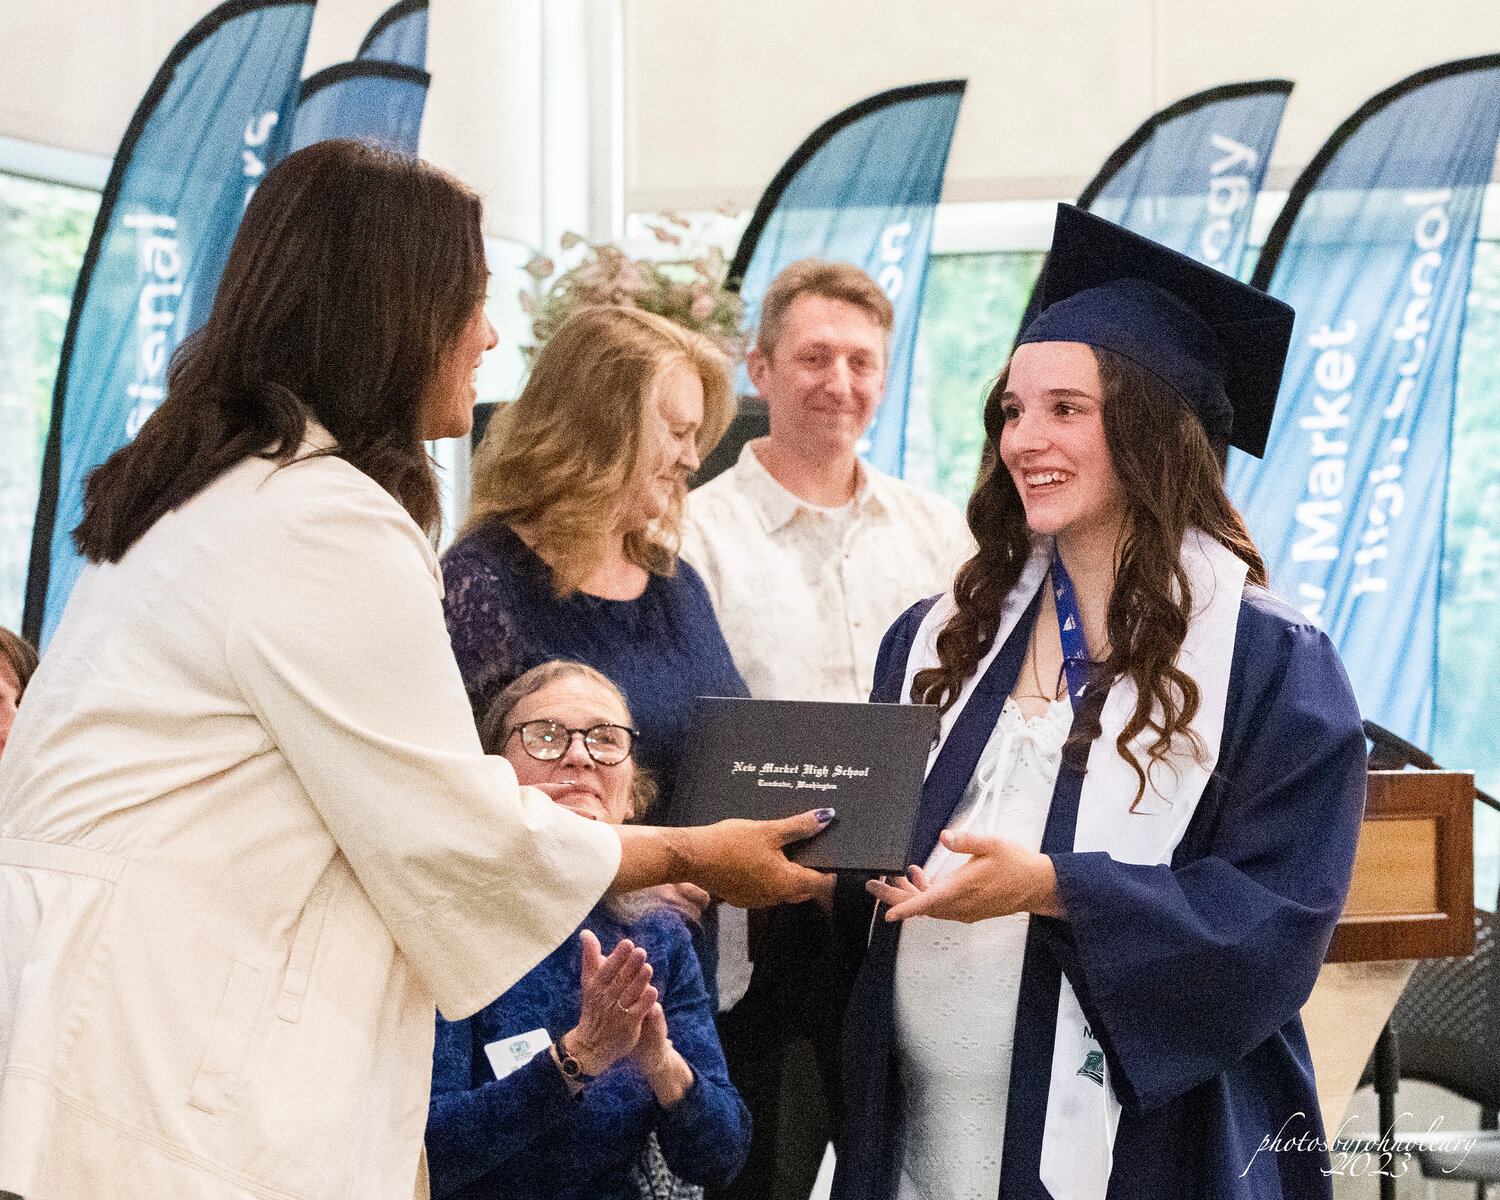 A New Market High School graduate receives her diploma.